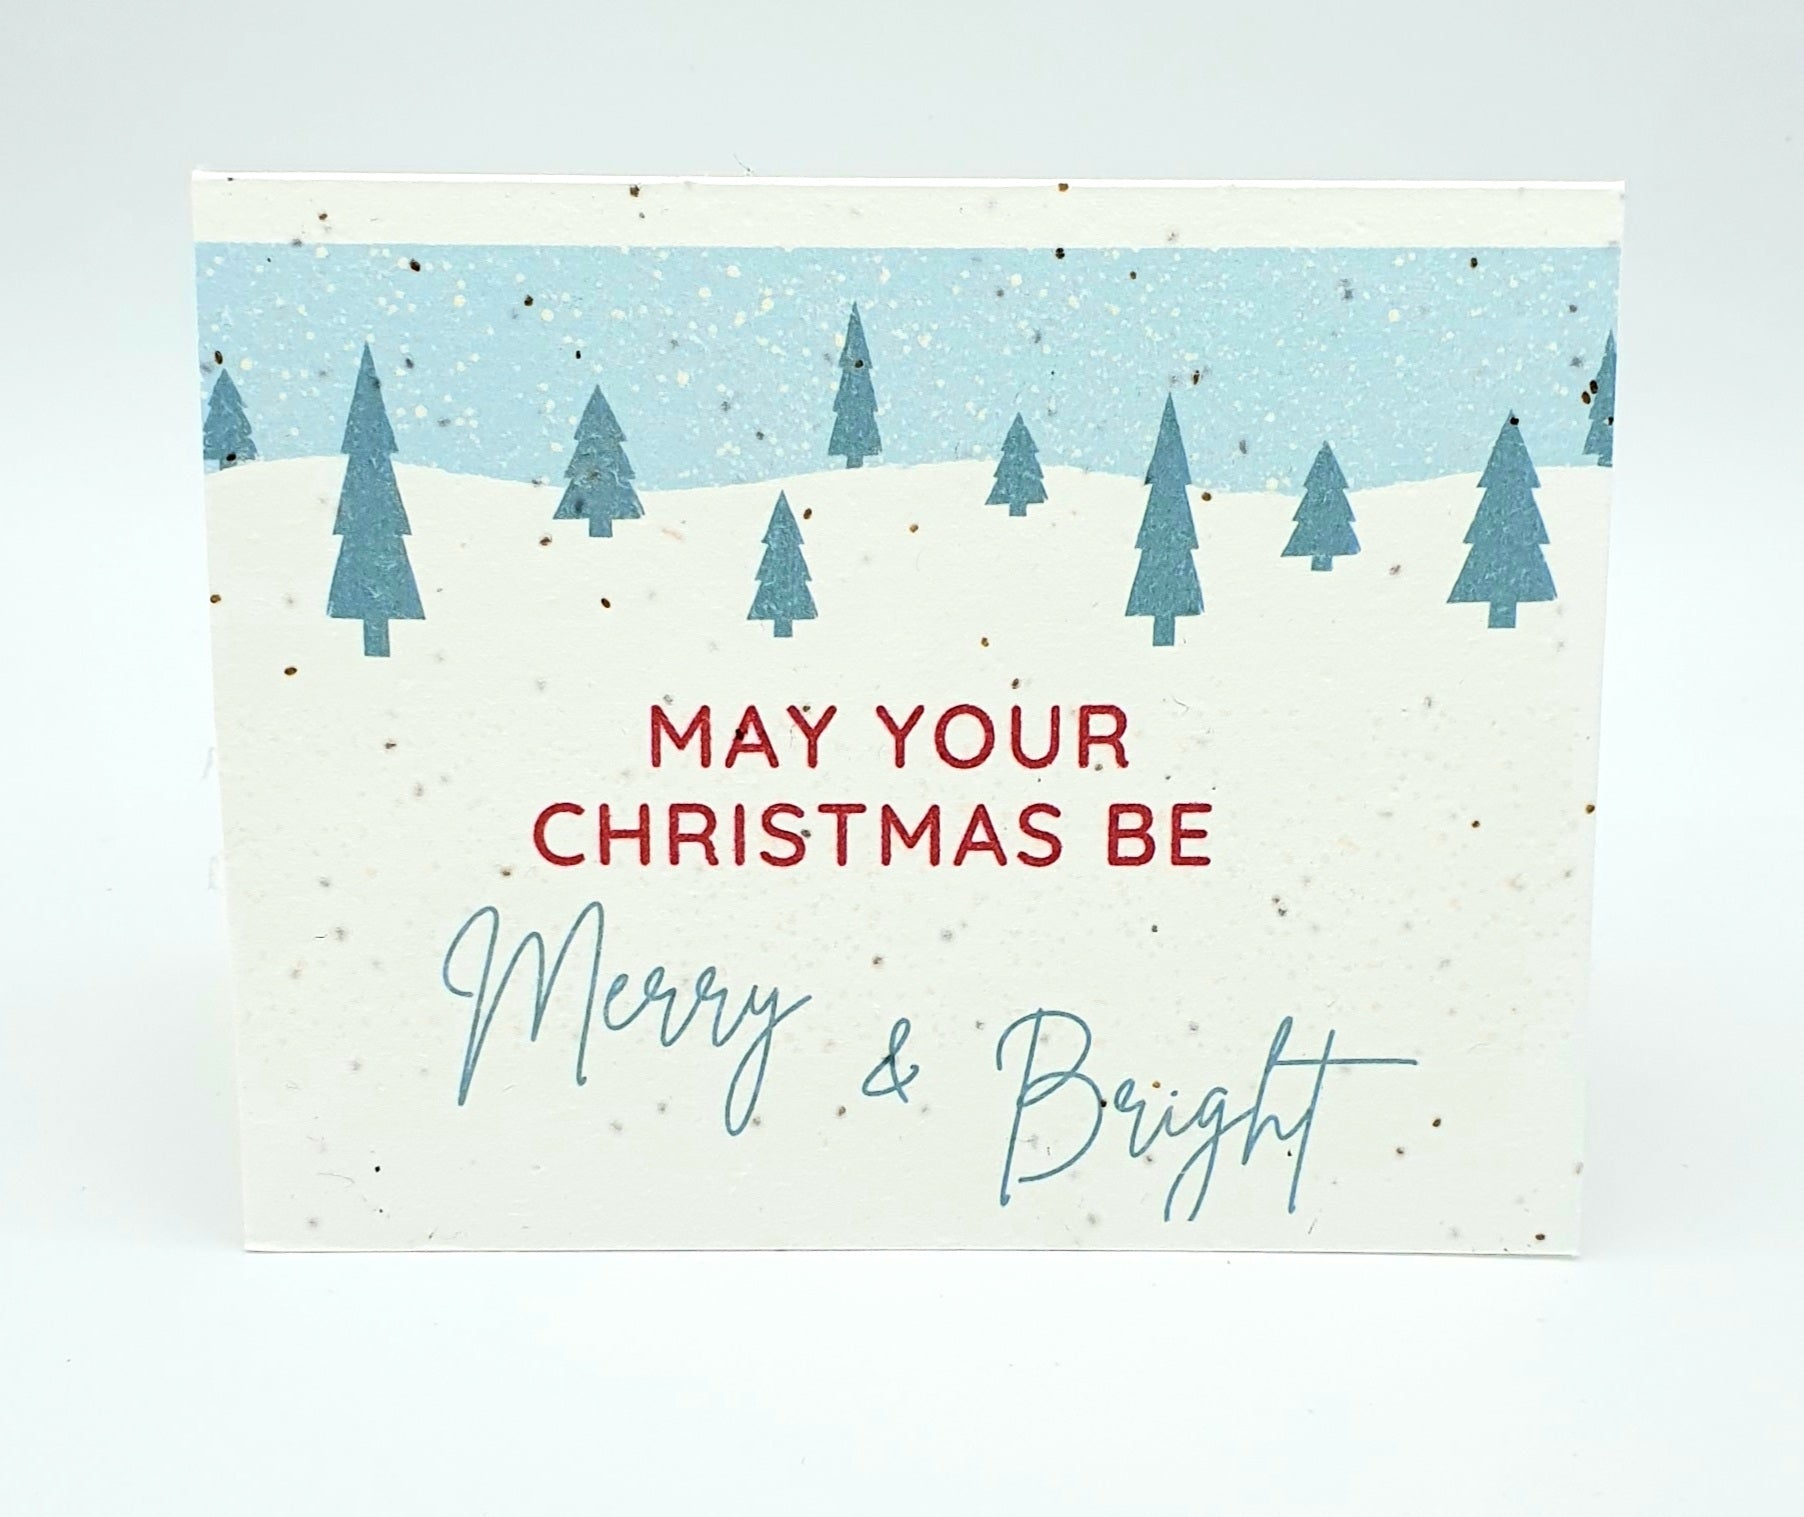 Plantable seed card with May your Christmas be Merry & Bright and small Christmas trees.